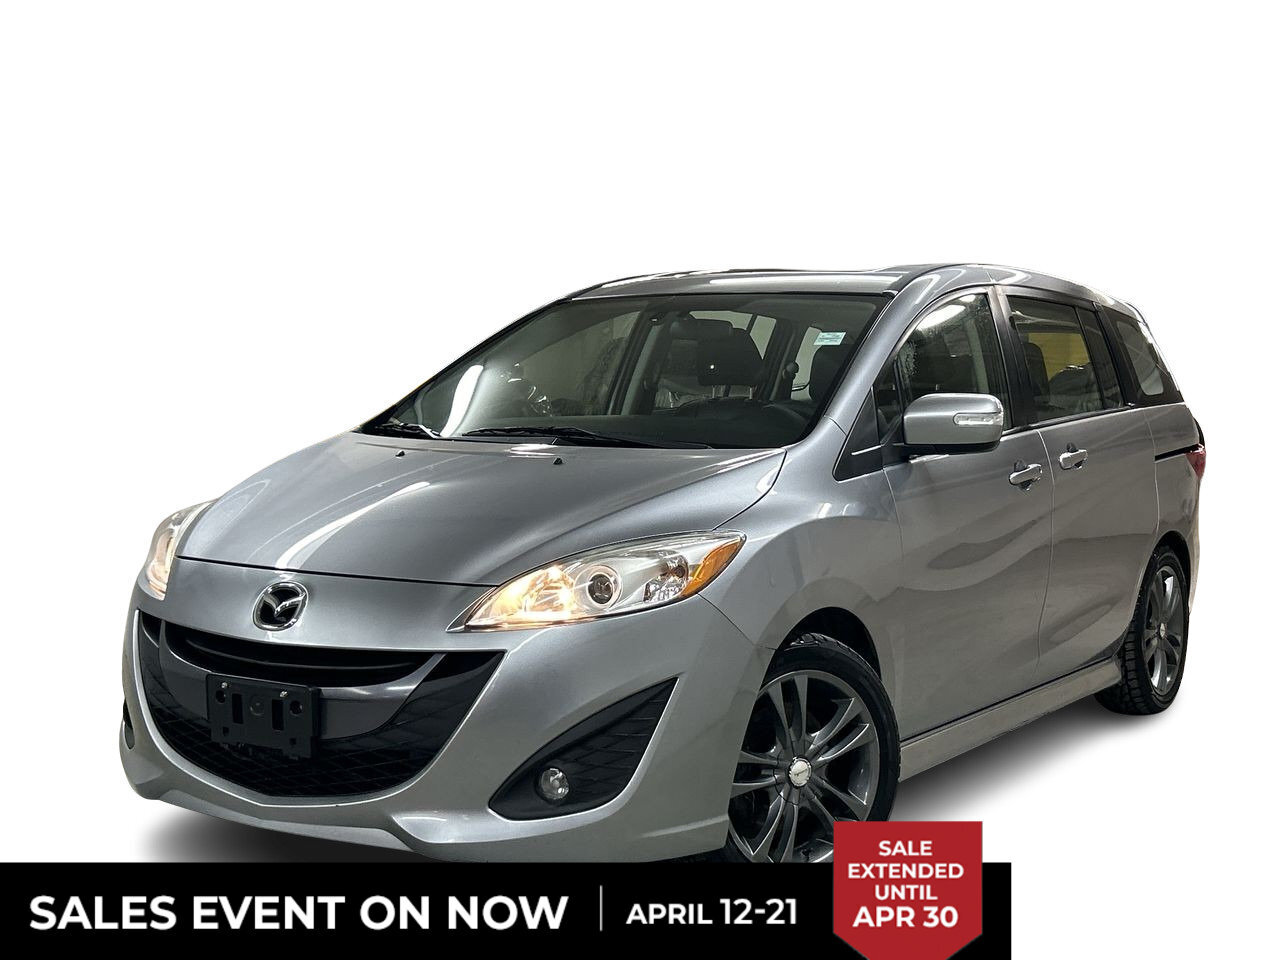 2017 Mazda Mazda5 GT at 2 Sets Rims/Tires | Accident Free | Leather 